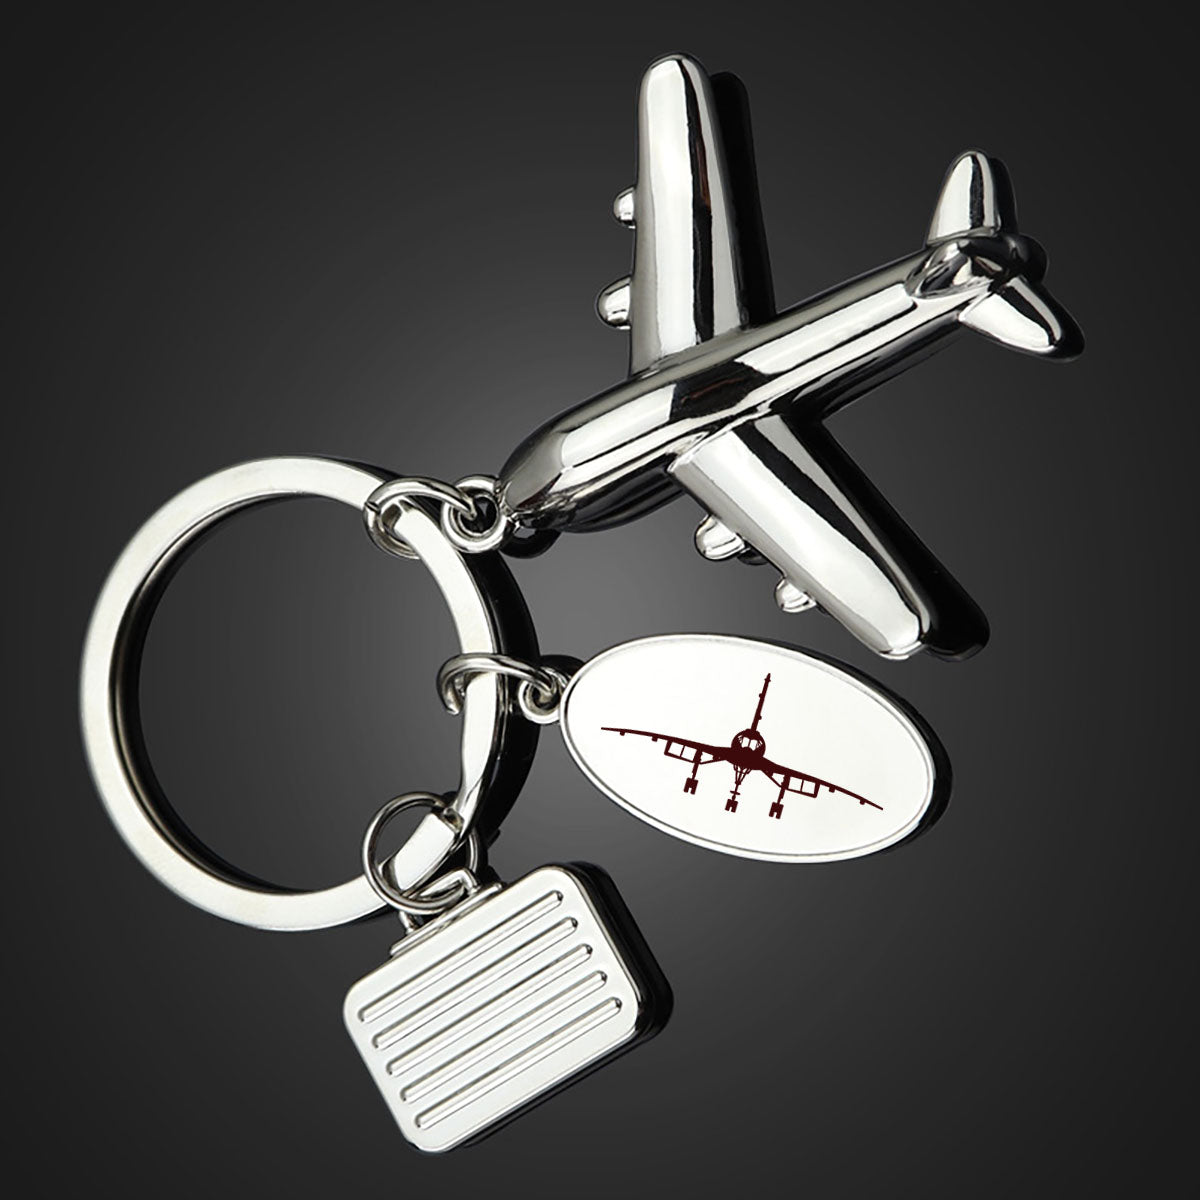 Concorde Silhouette Designed Suitcase Airplane Key Chains